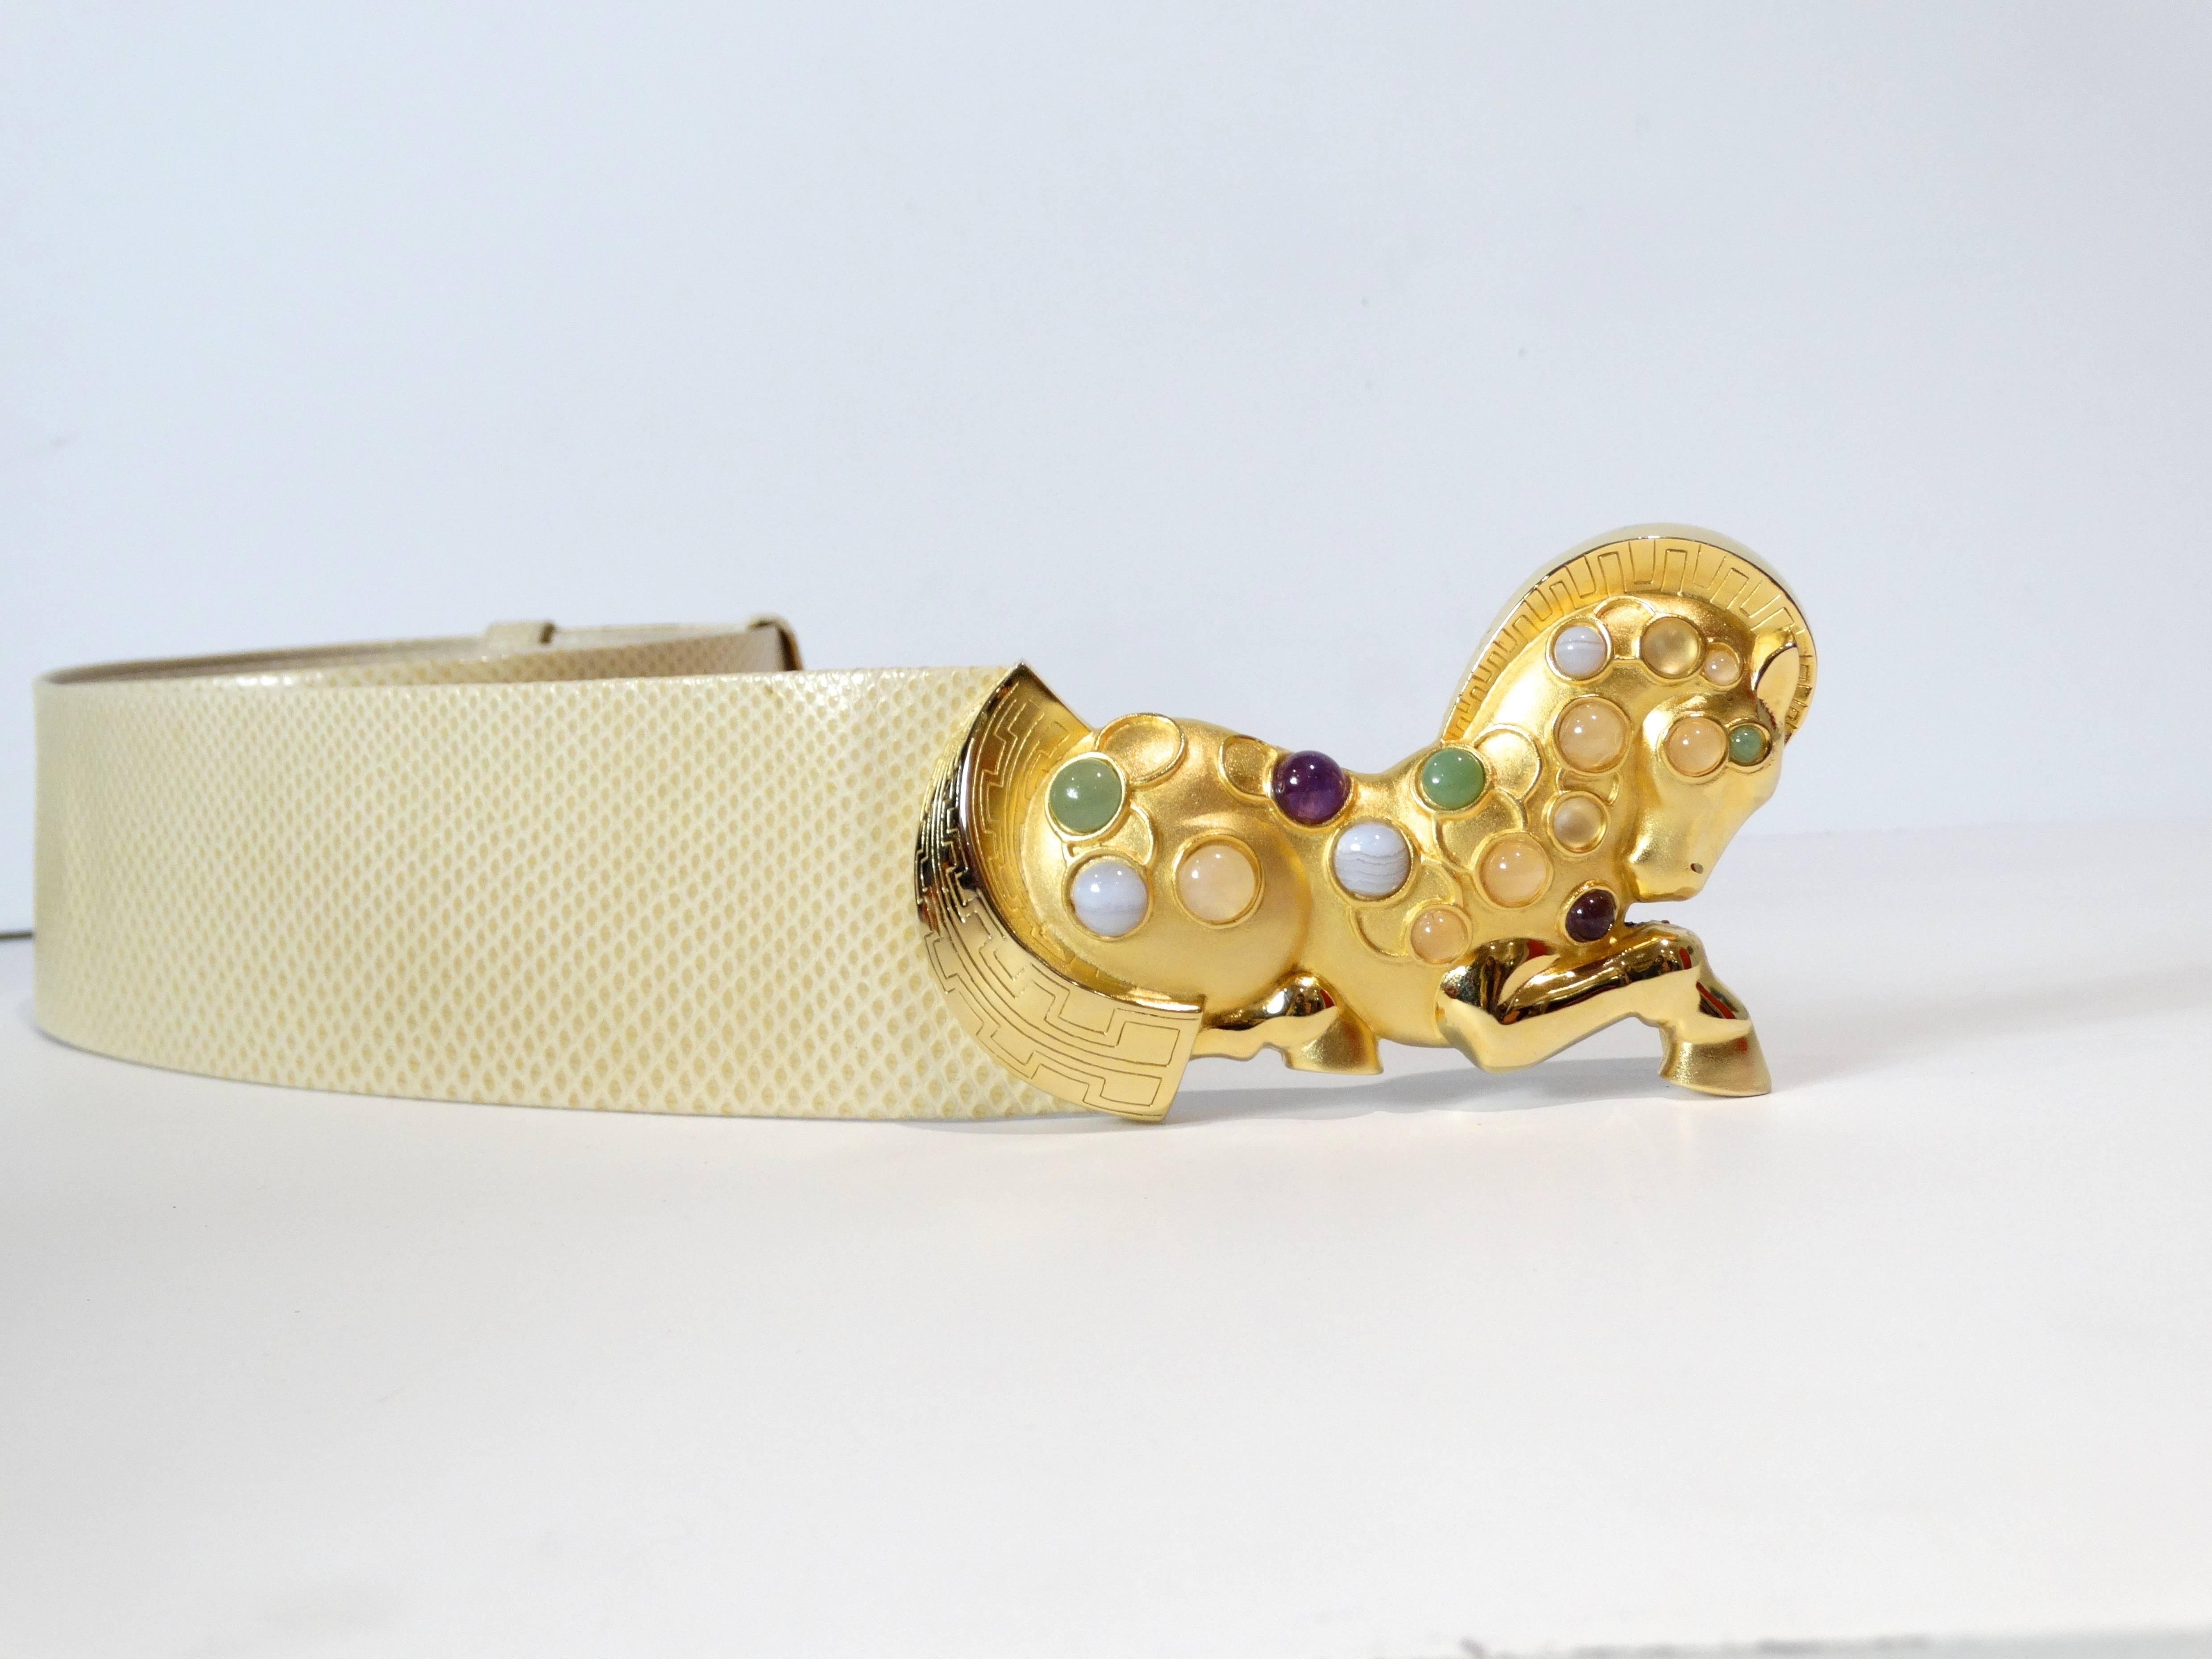 1980's Judith Leiber Golden Trojan Horse Buckle is embellished with lovely cabochon stones of Amethyst, Jade, White Marble Horse features polished and matte gold-tone metal. The horse's mane and tail are etched in an interpretation of a traditional